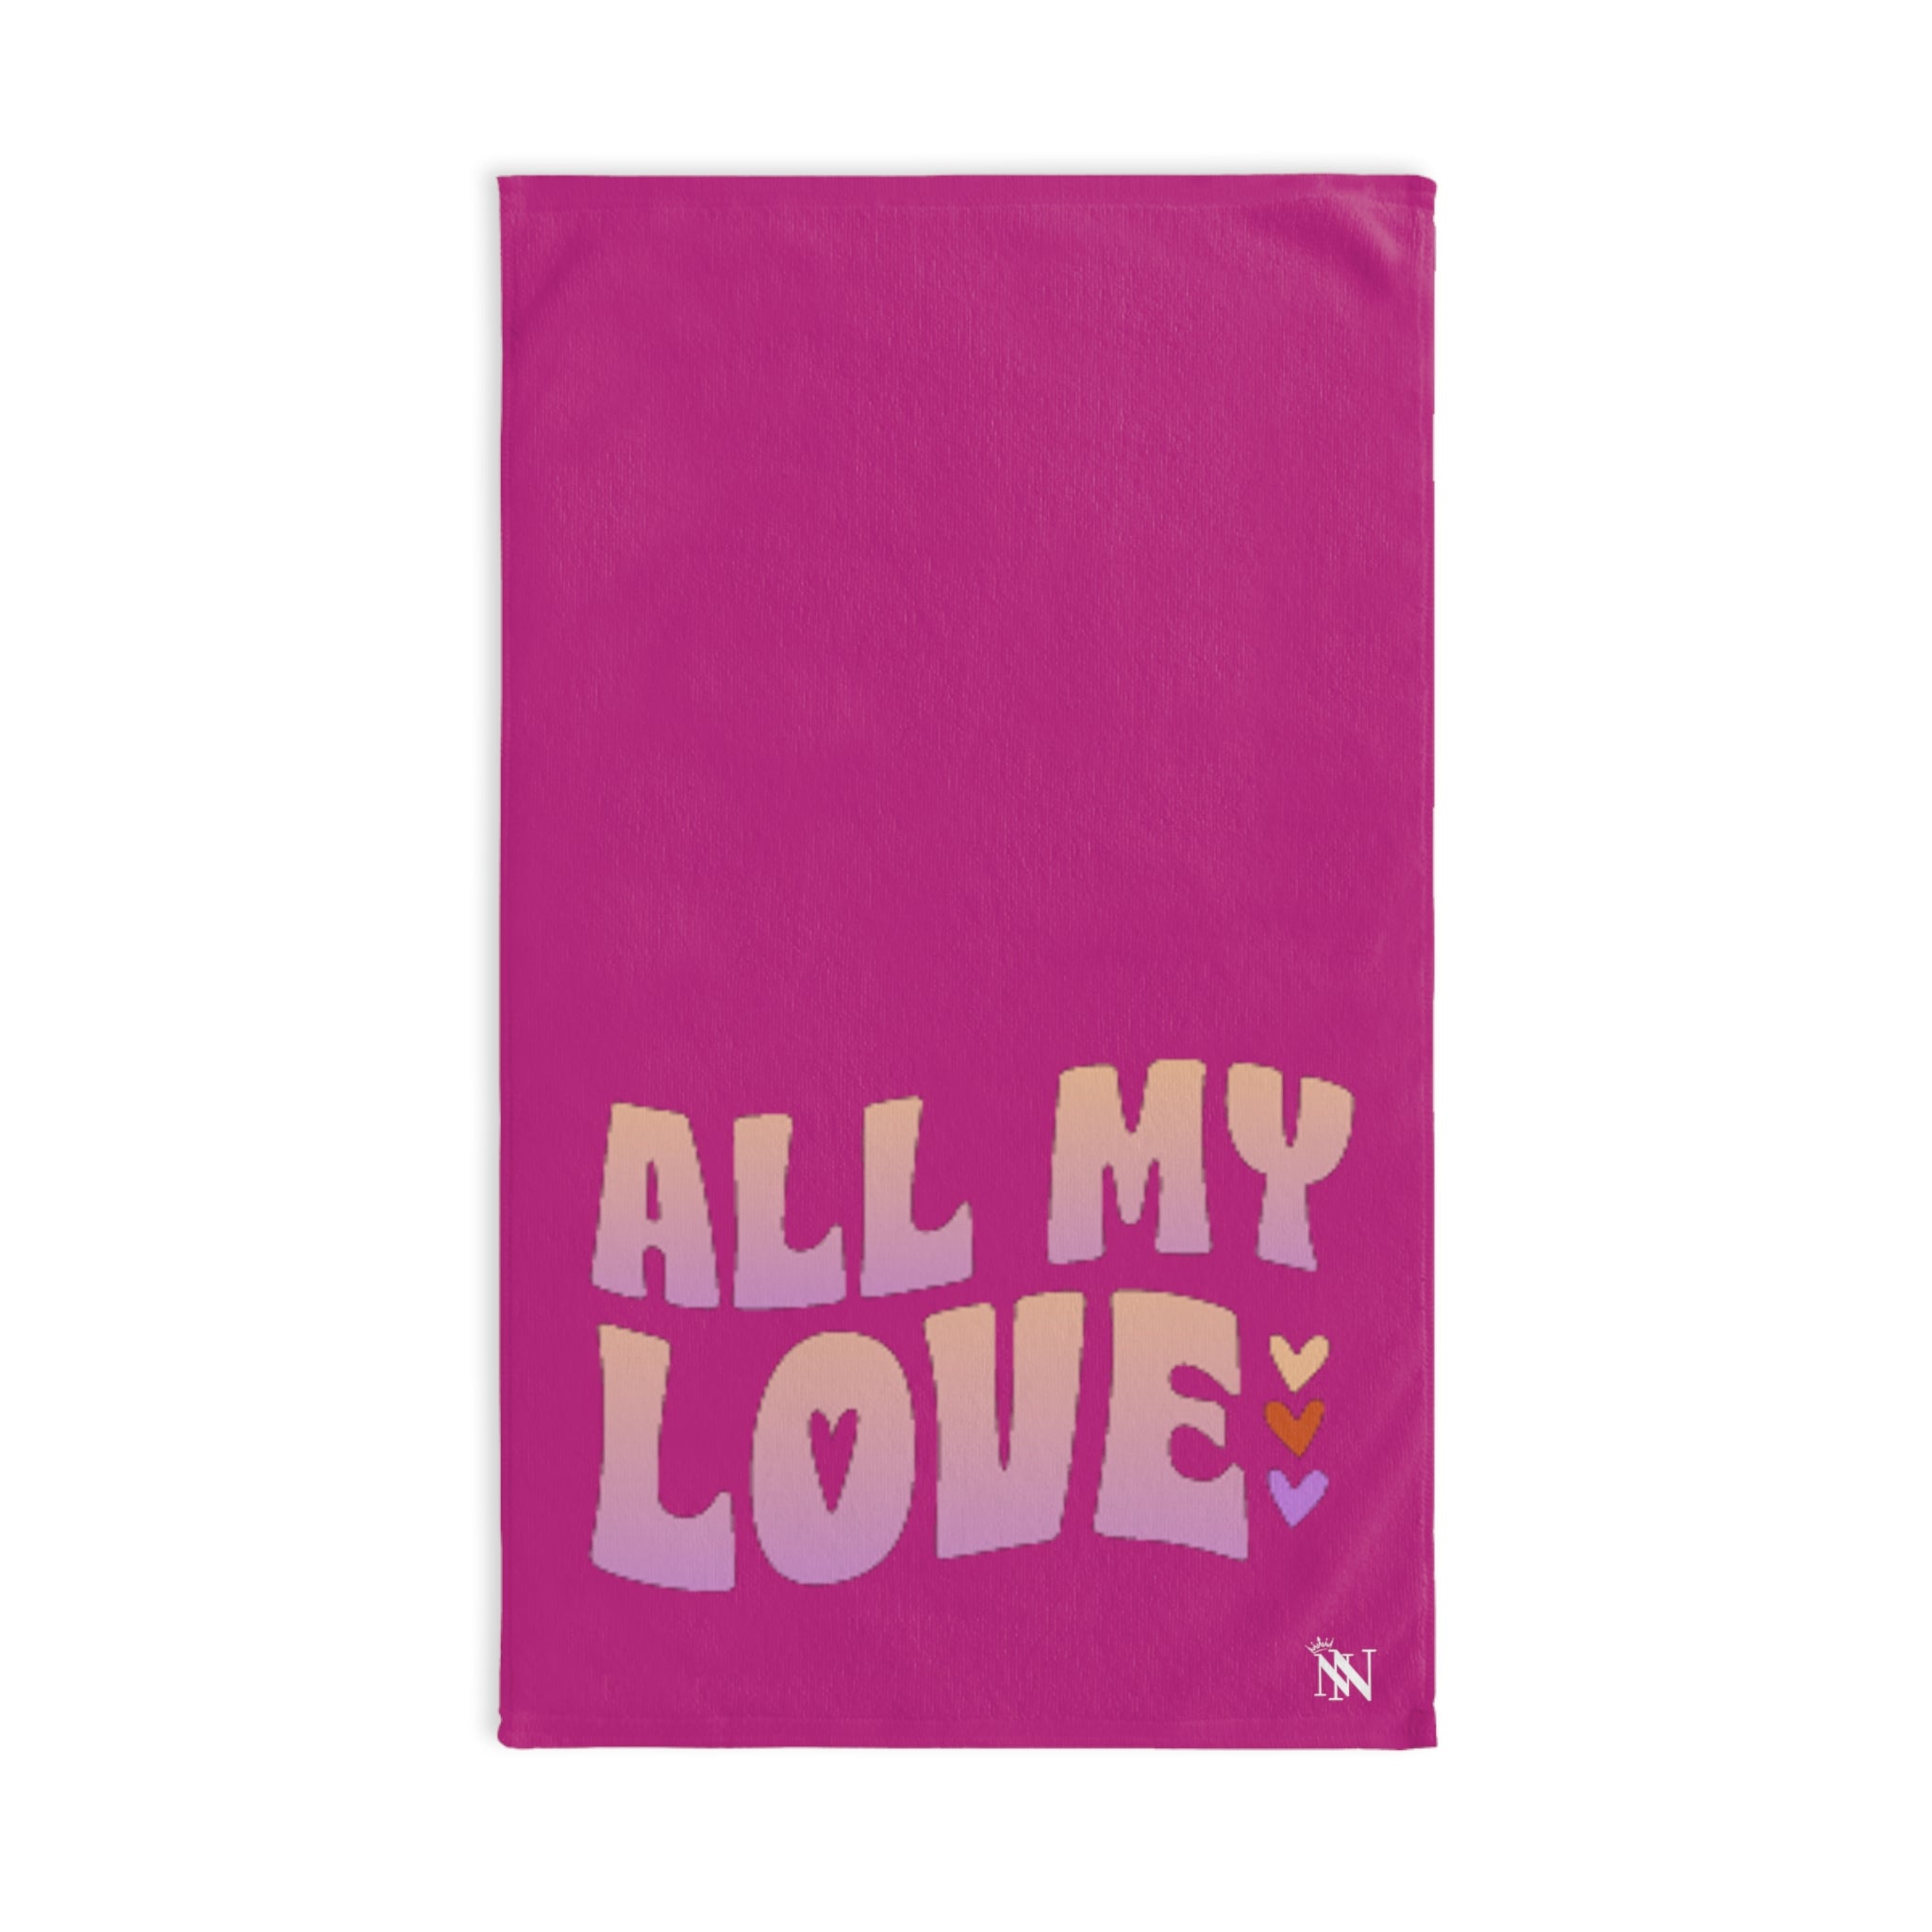 All My Love Fuscia | Funny Gifts for Men - Gifts for Him - Birthday Gifts for Men, Him, Husband, Boyfriend, New Couple Gifts, Fathers & Valentines Day Gifts, Hand Towels NECTAR NAPKINS